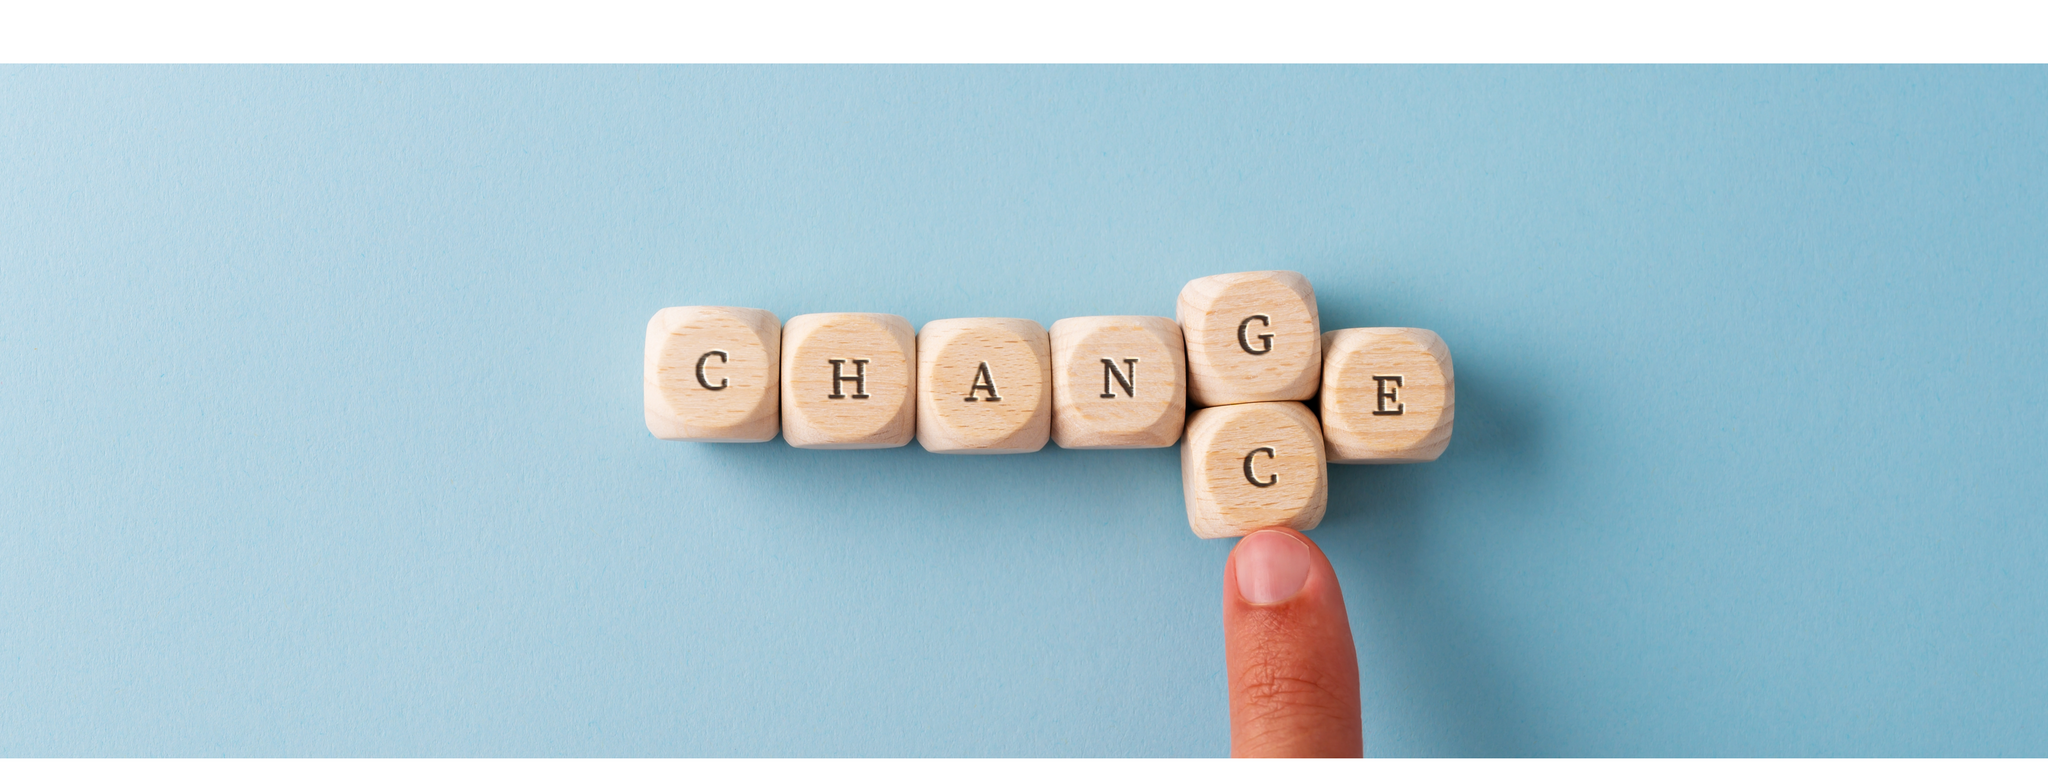 Is Covid-19 your chance to change?